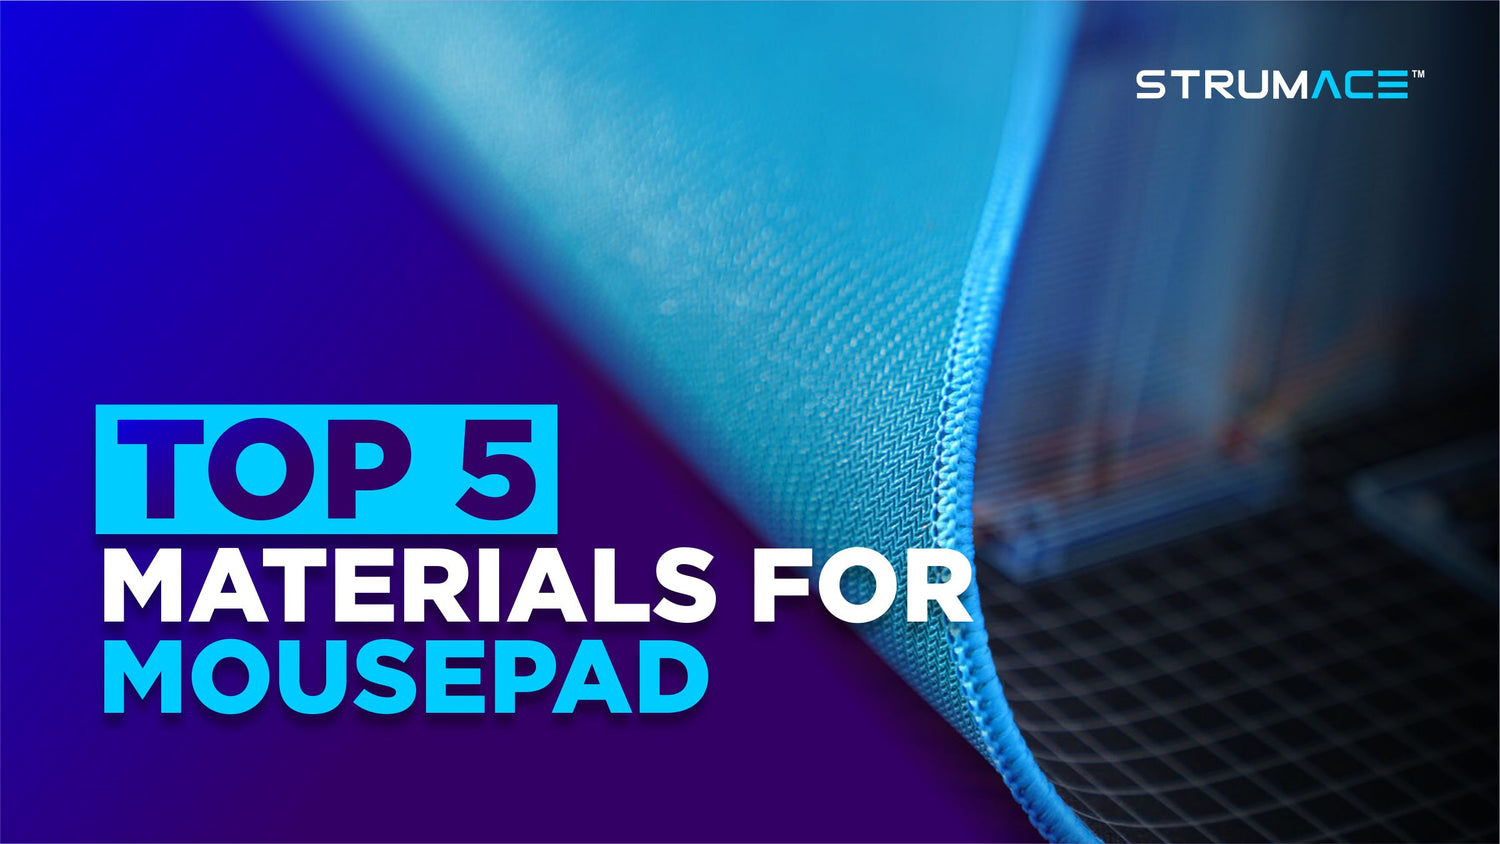 What are the Top 5 Materials for Mousepads?